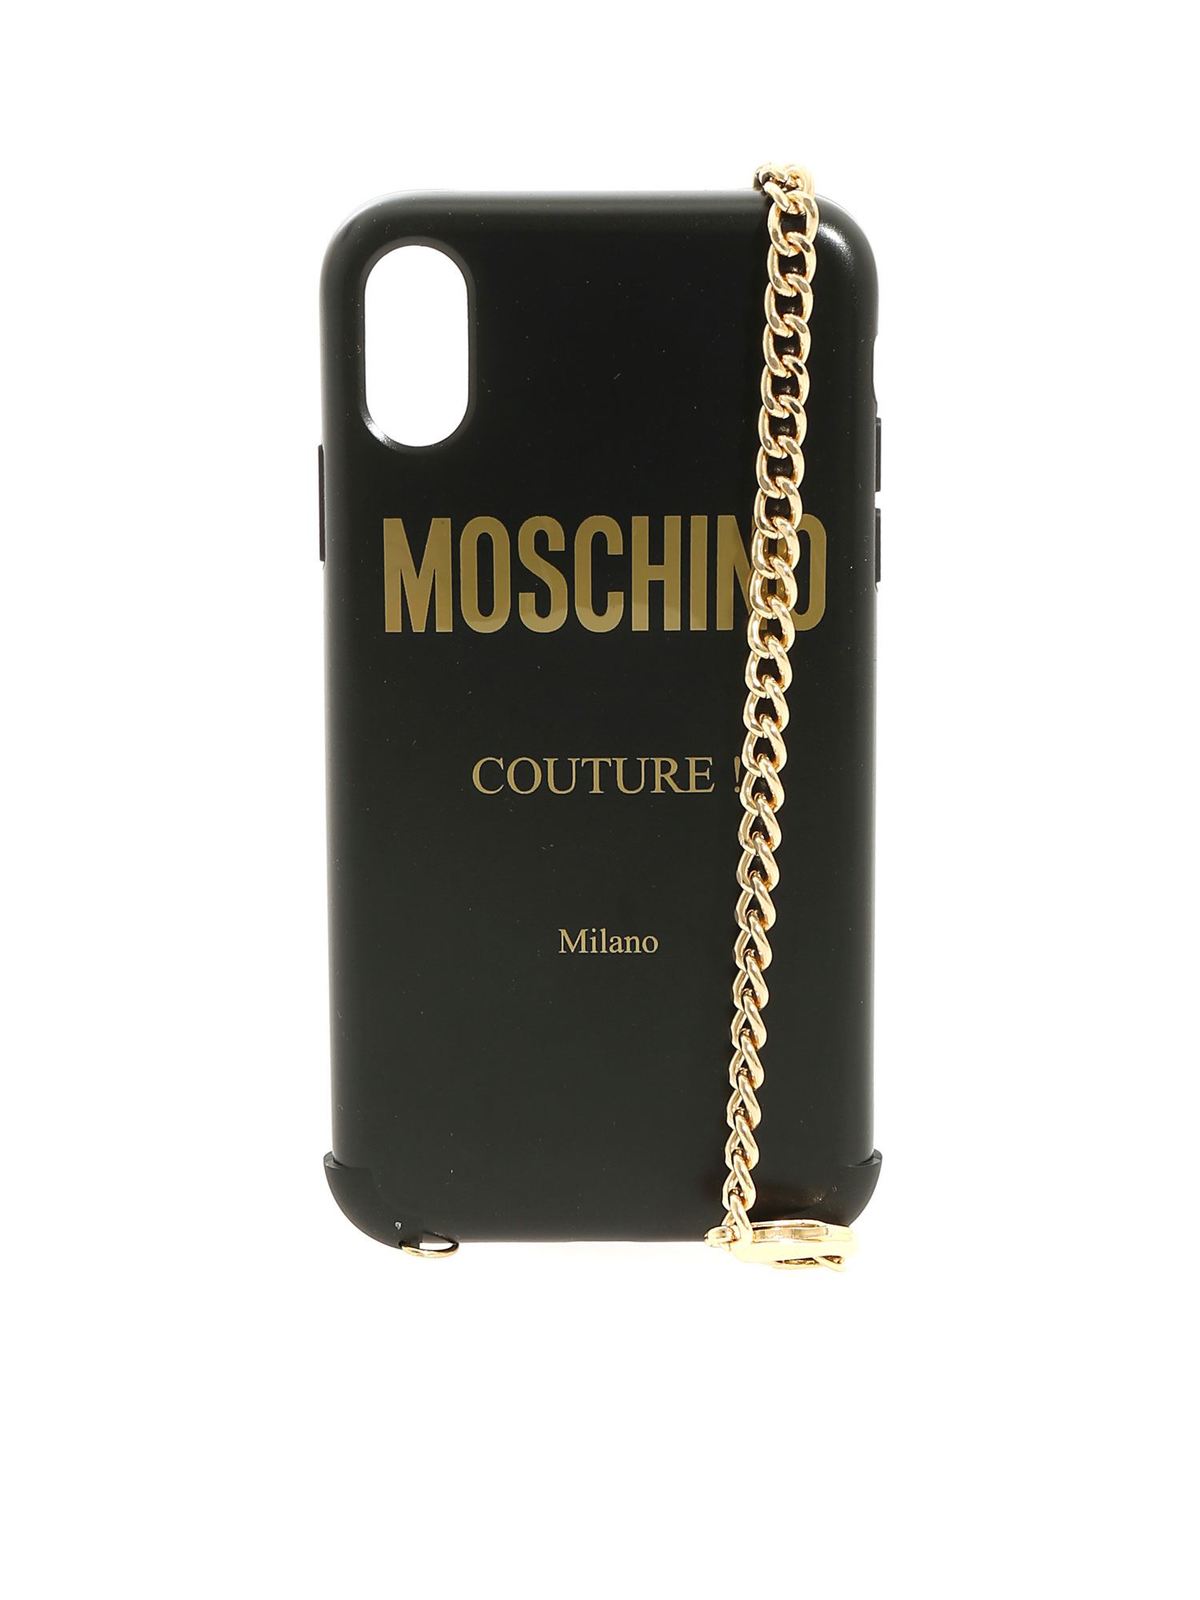 moschino case iphone xr